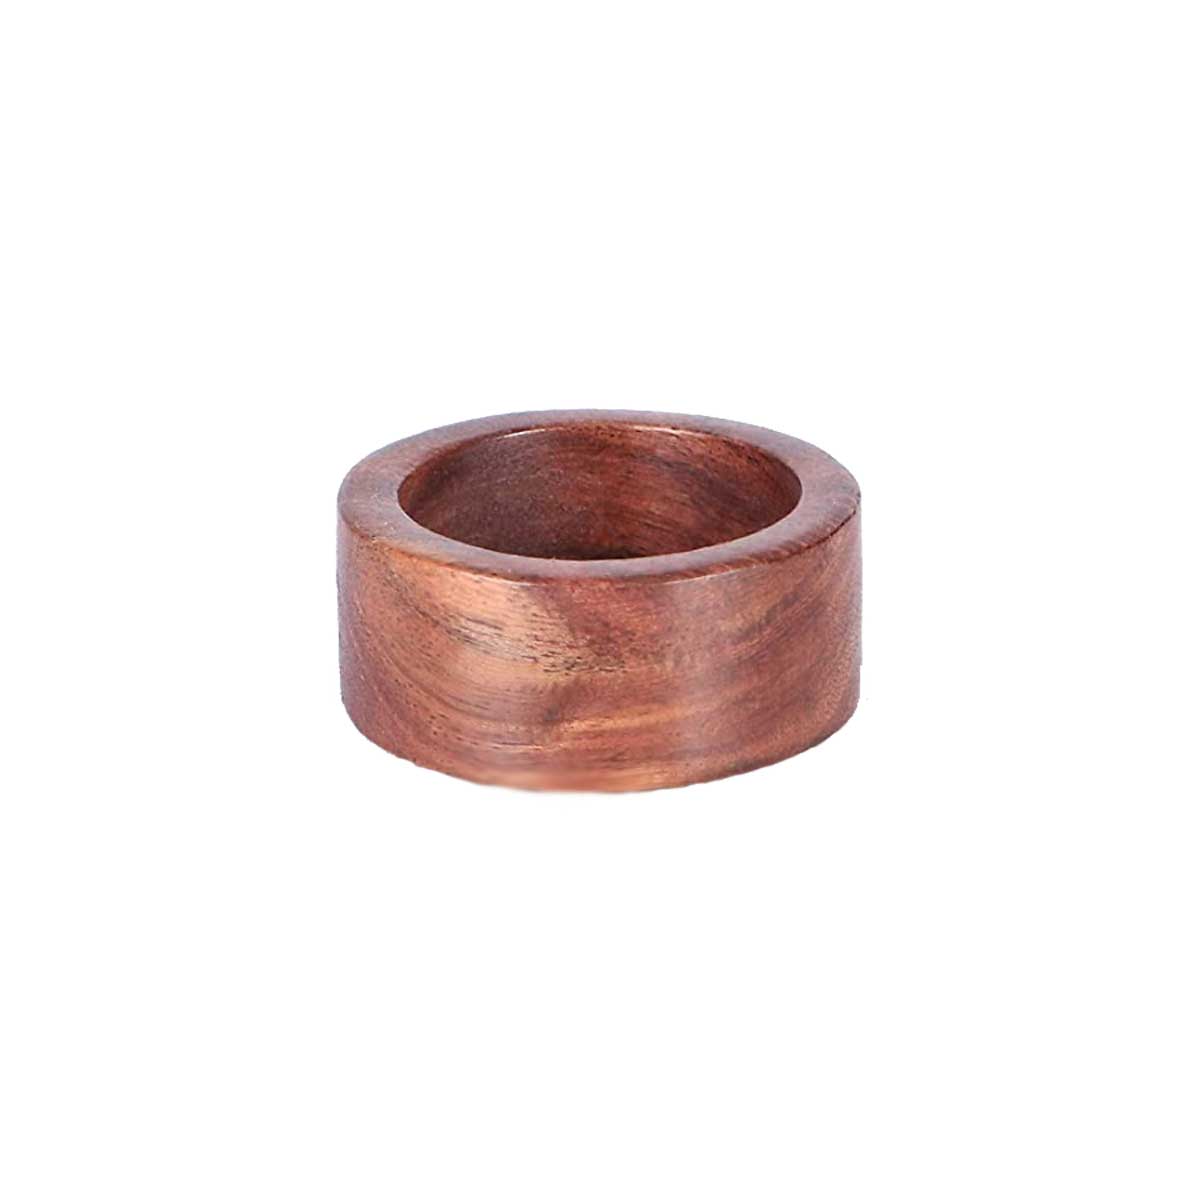 Scarf Ring Wooden Scarf Ring Scarf Ring Clip Wood Scarf 